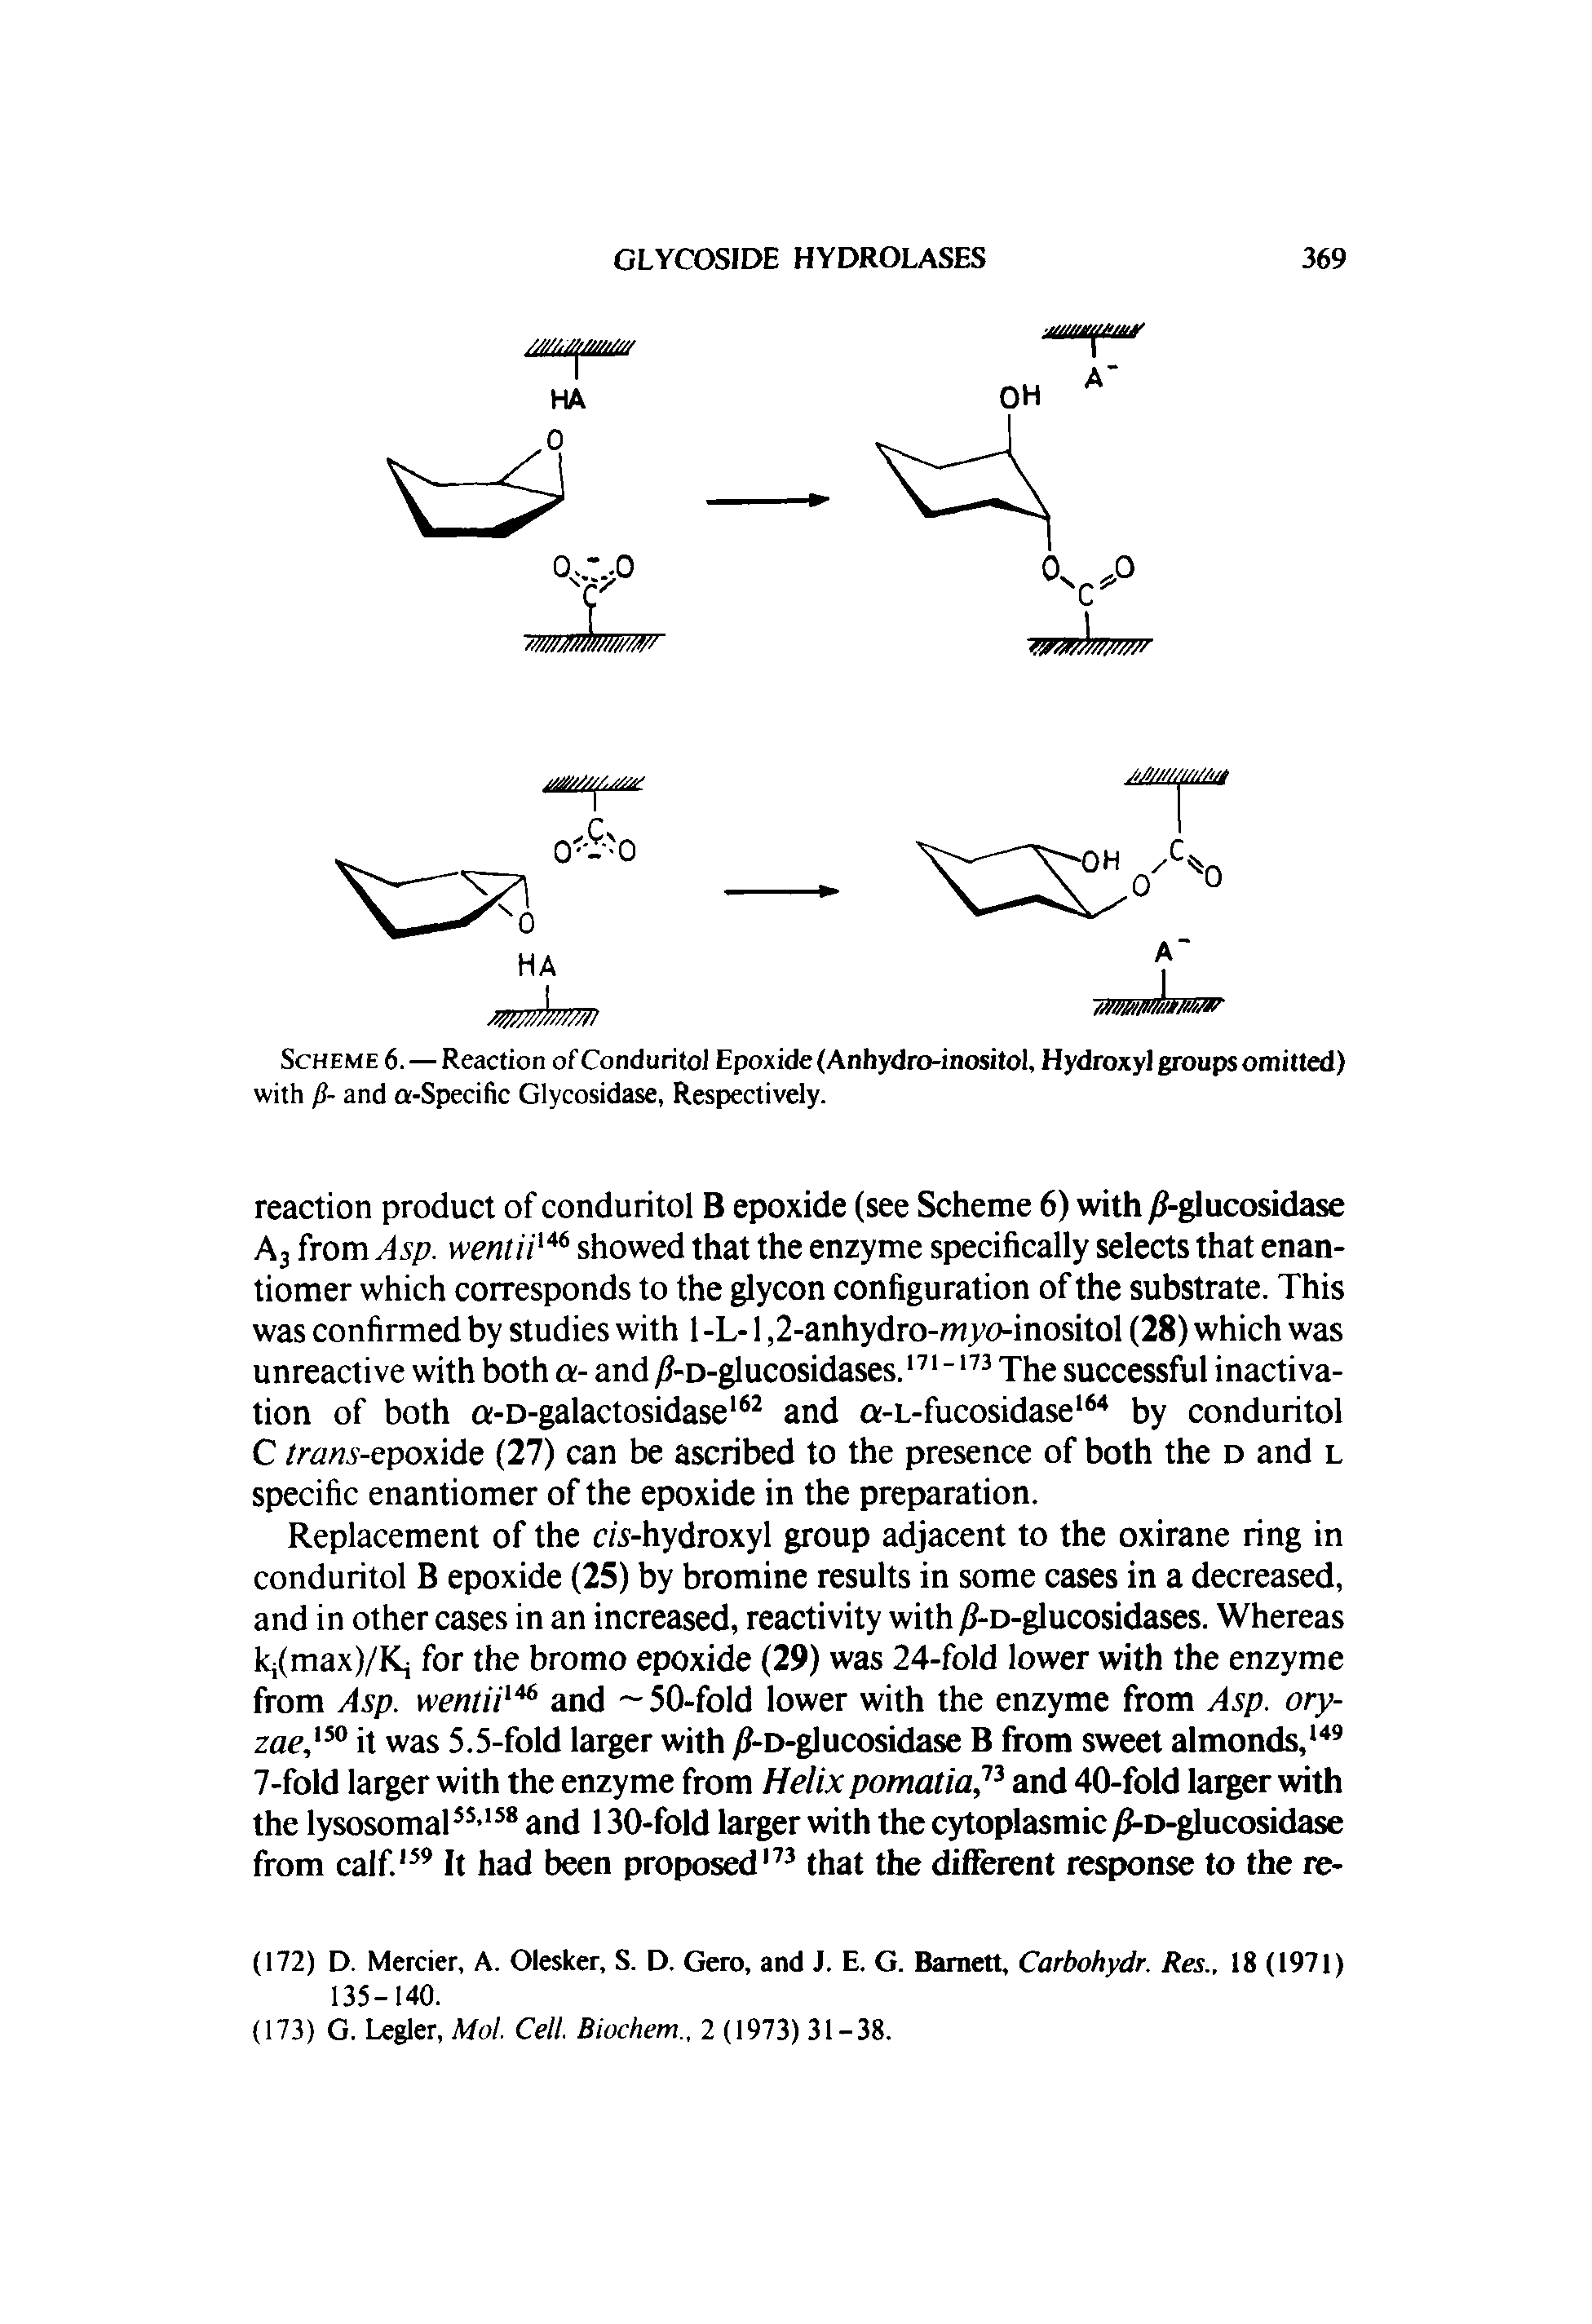 Scheme 6. — Reaction of ConduritoJ Epoxide (Anhydro-inositol, Hydroxyl groups omitted) with / - and a-Specific Glycosidase, Respectively.